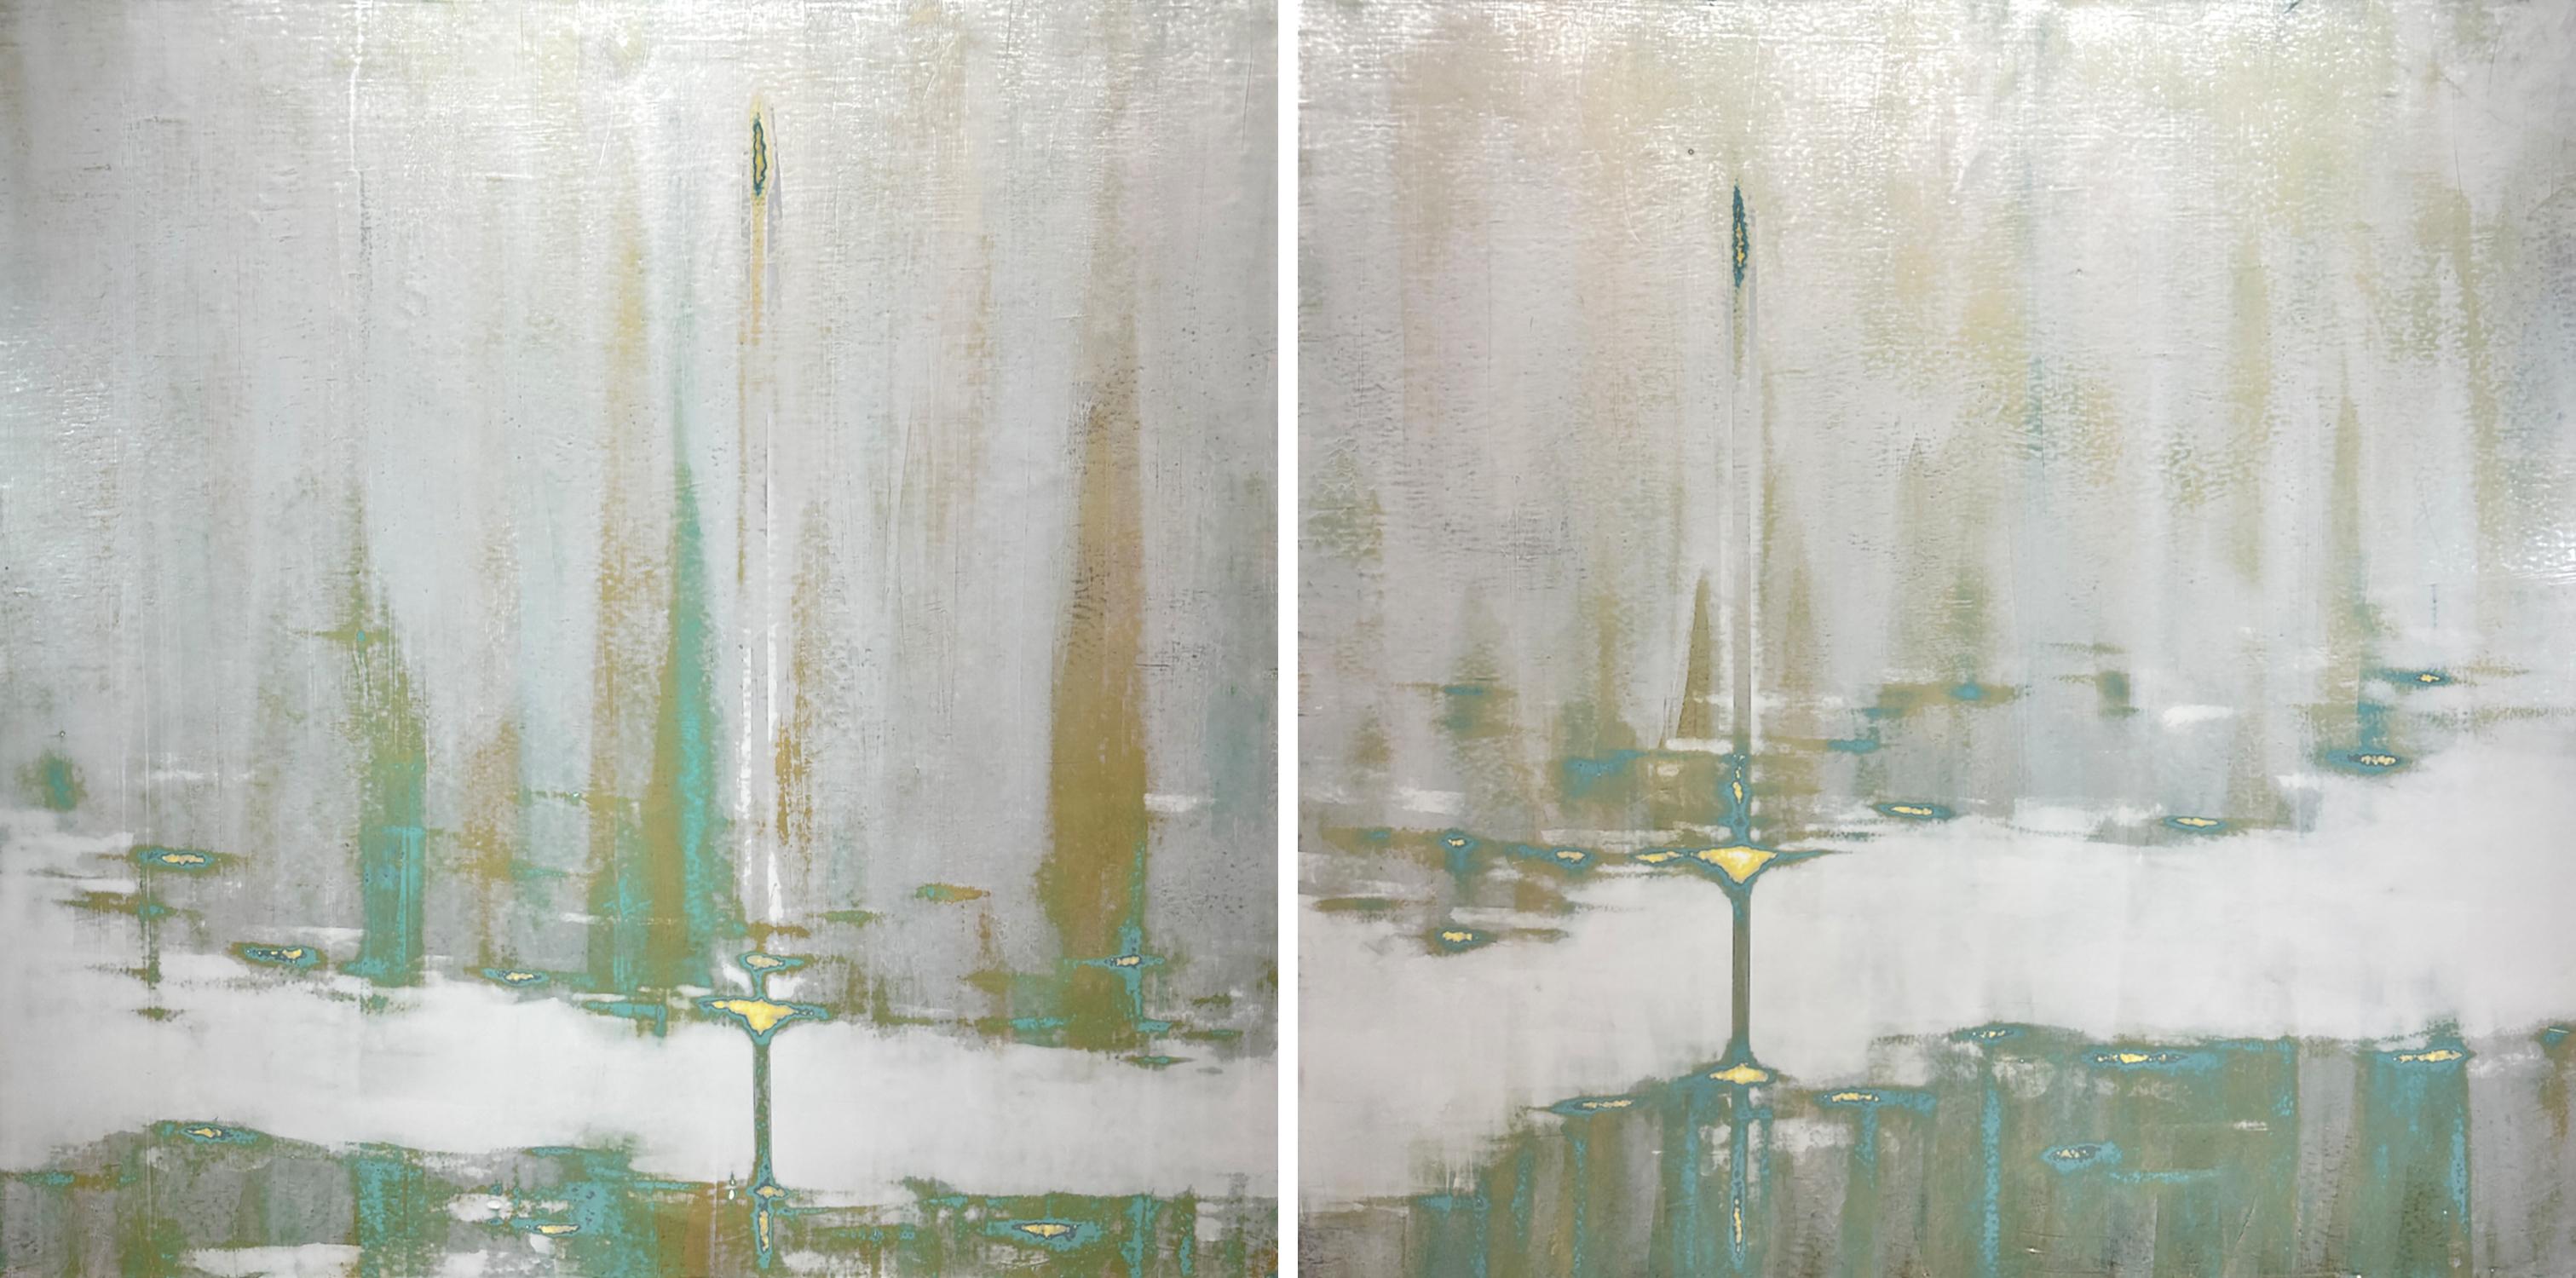 Somewhere Silver_Diptych_Audra Weaser_Acrylic/Metallic Pigment/Plaster_Abstract